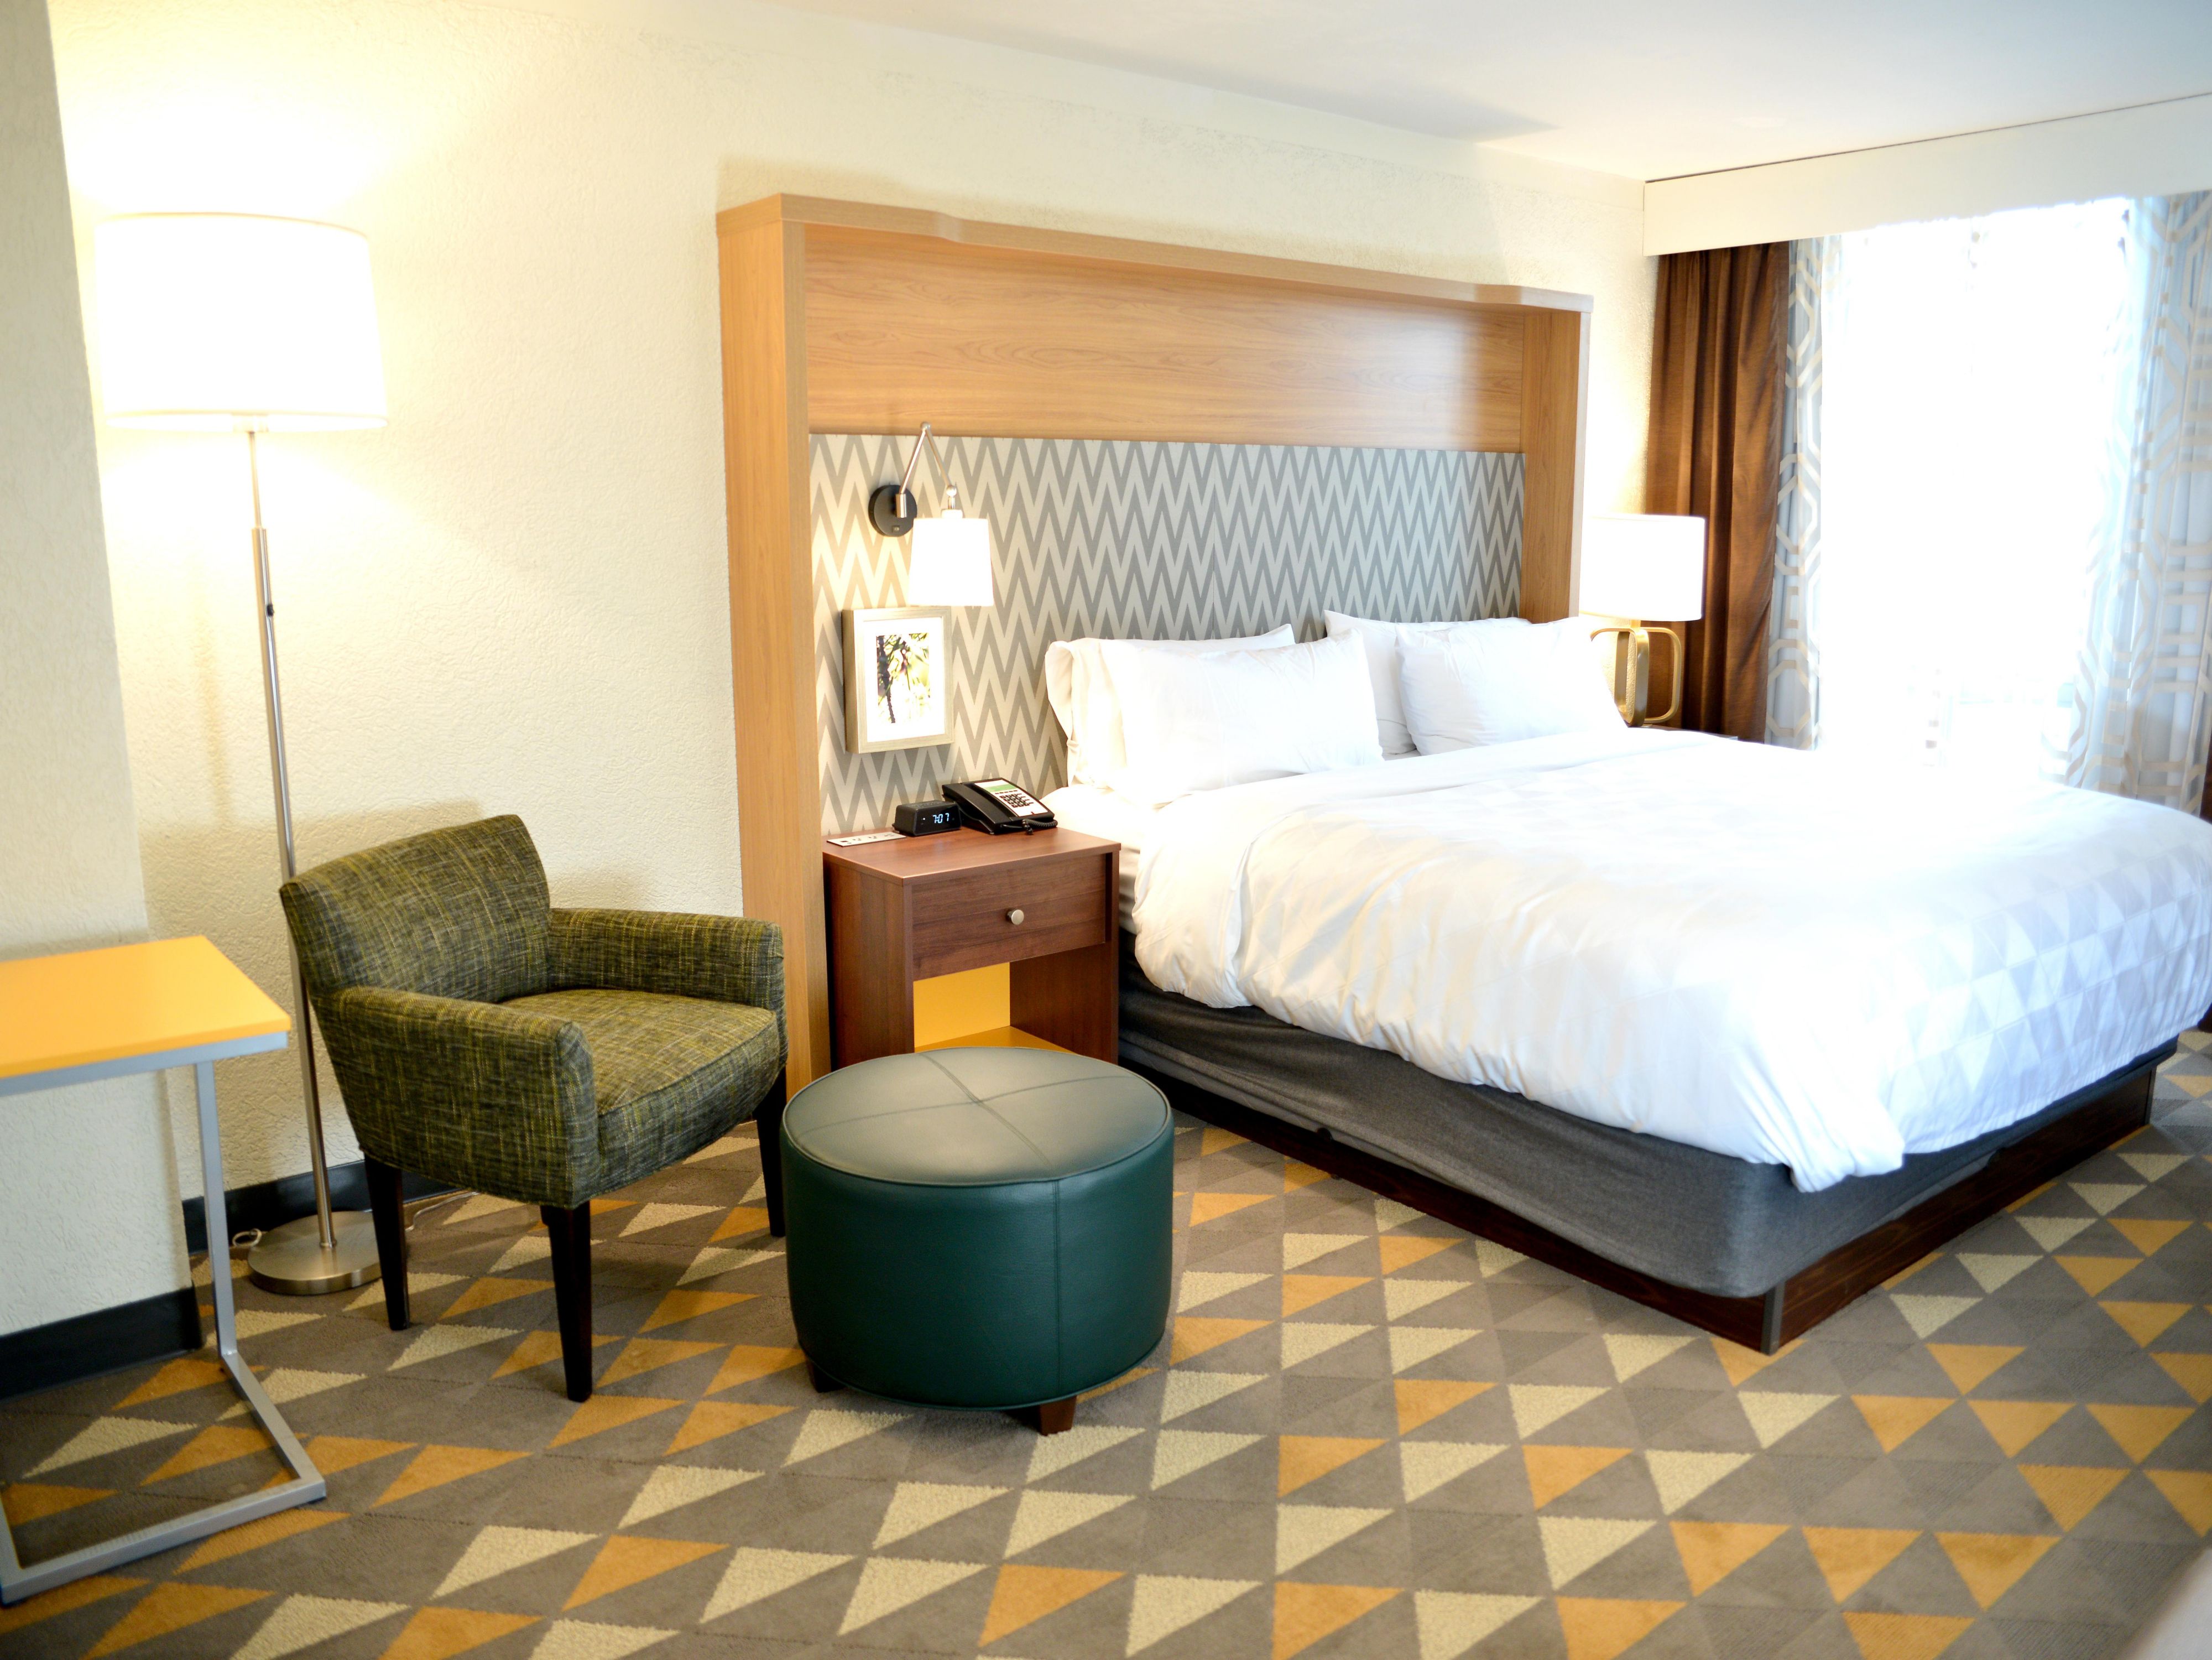 Newly renovated rooms include new mattresses and showers. Day rates available for corporate workers.